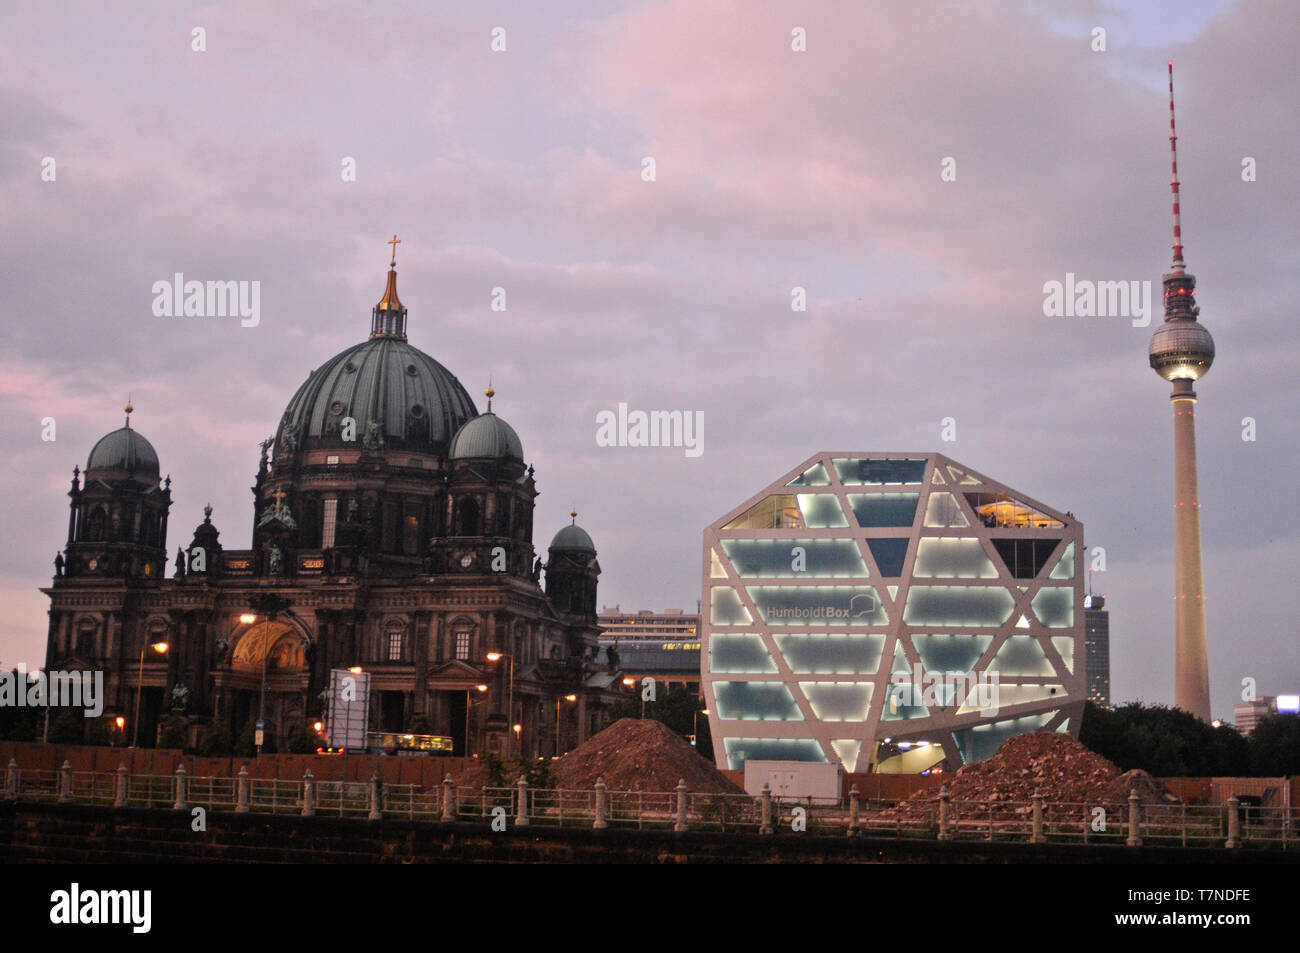 Berlin skyline at twilight, picturing the Berlin Cathedral, Humboldt Box and Fernsehturm (TV Tower); Germany Stock Photo